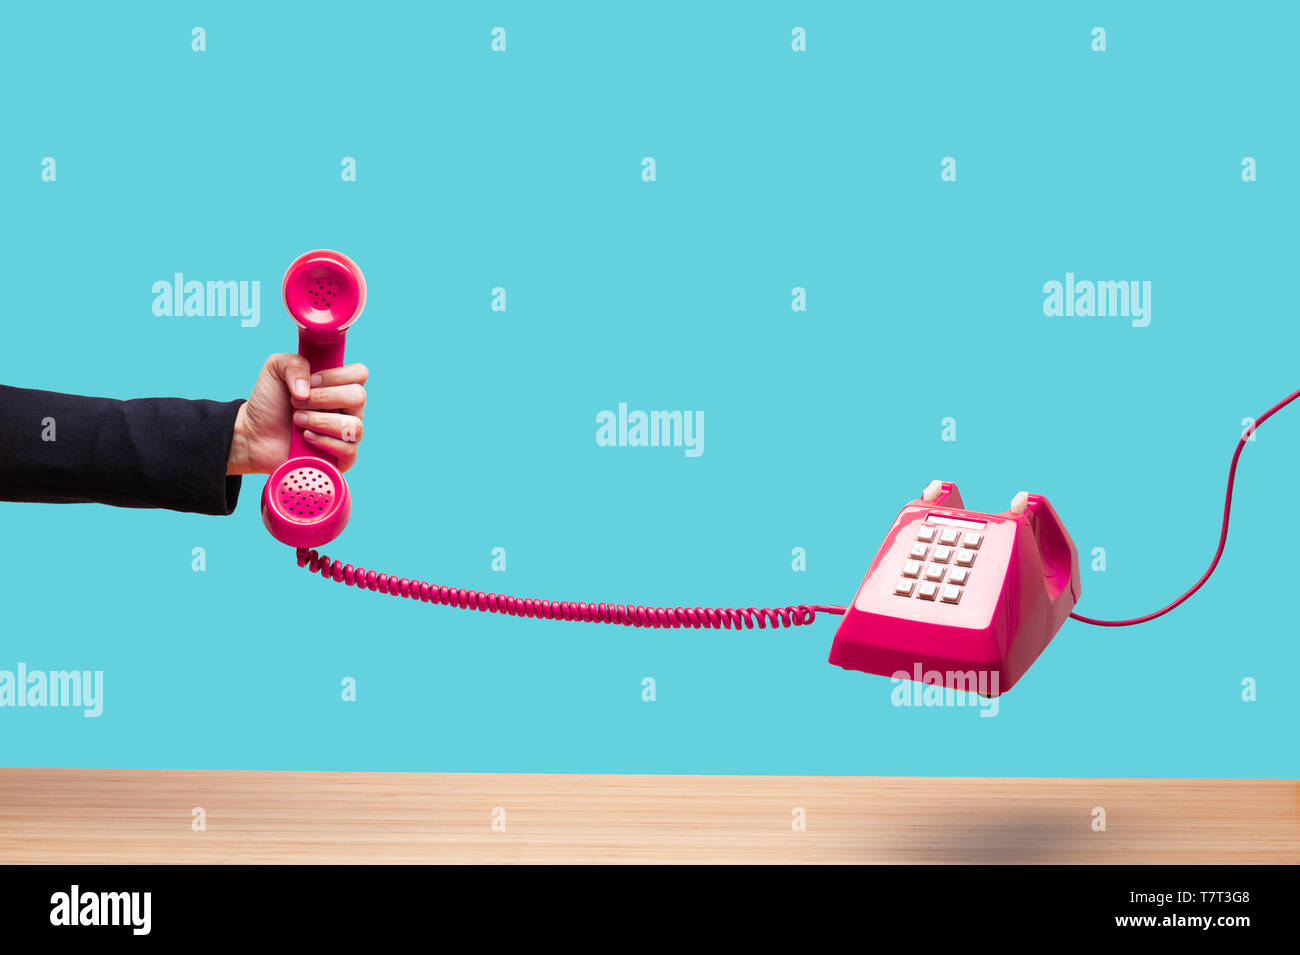 Business woman holding the red phone, urgent call waiting , classic red telephone receiver in hand wearing black suit, old telephone on white backgrou Stock Photo